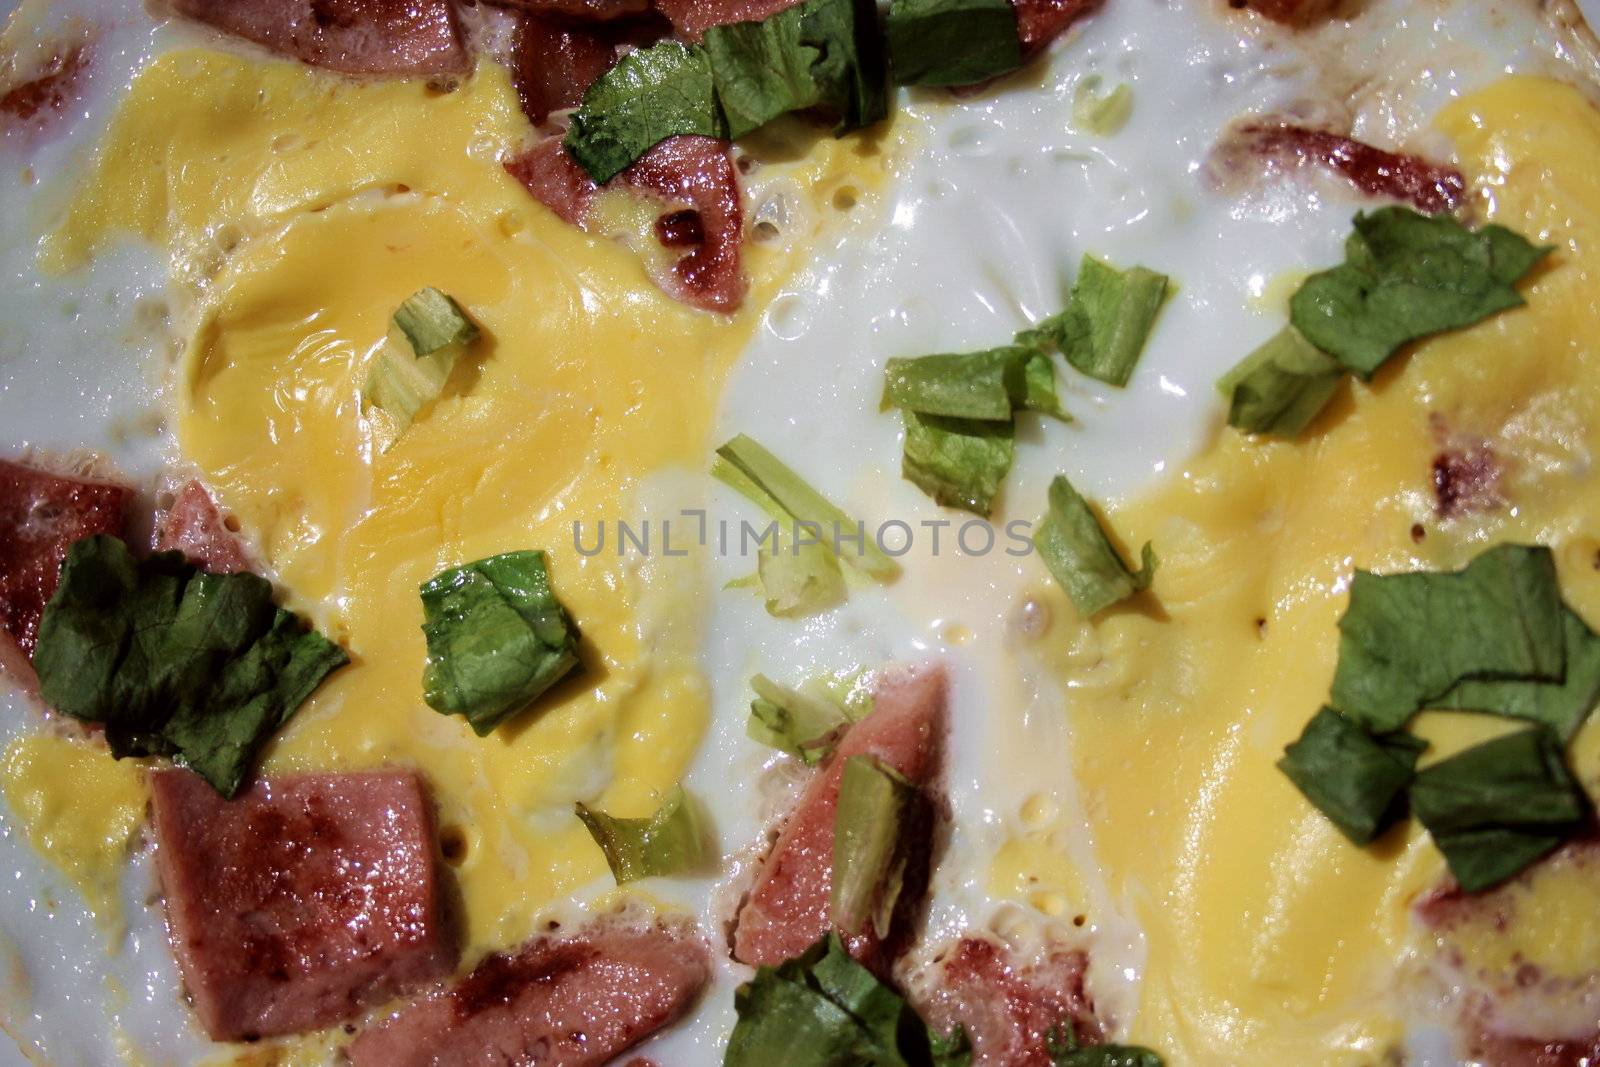 omelet with wurst and greens 2  by ichip